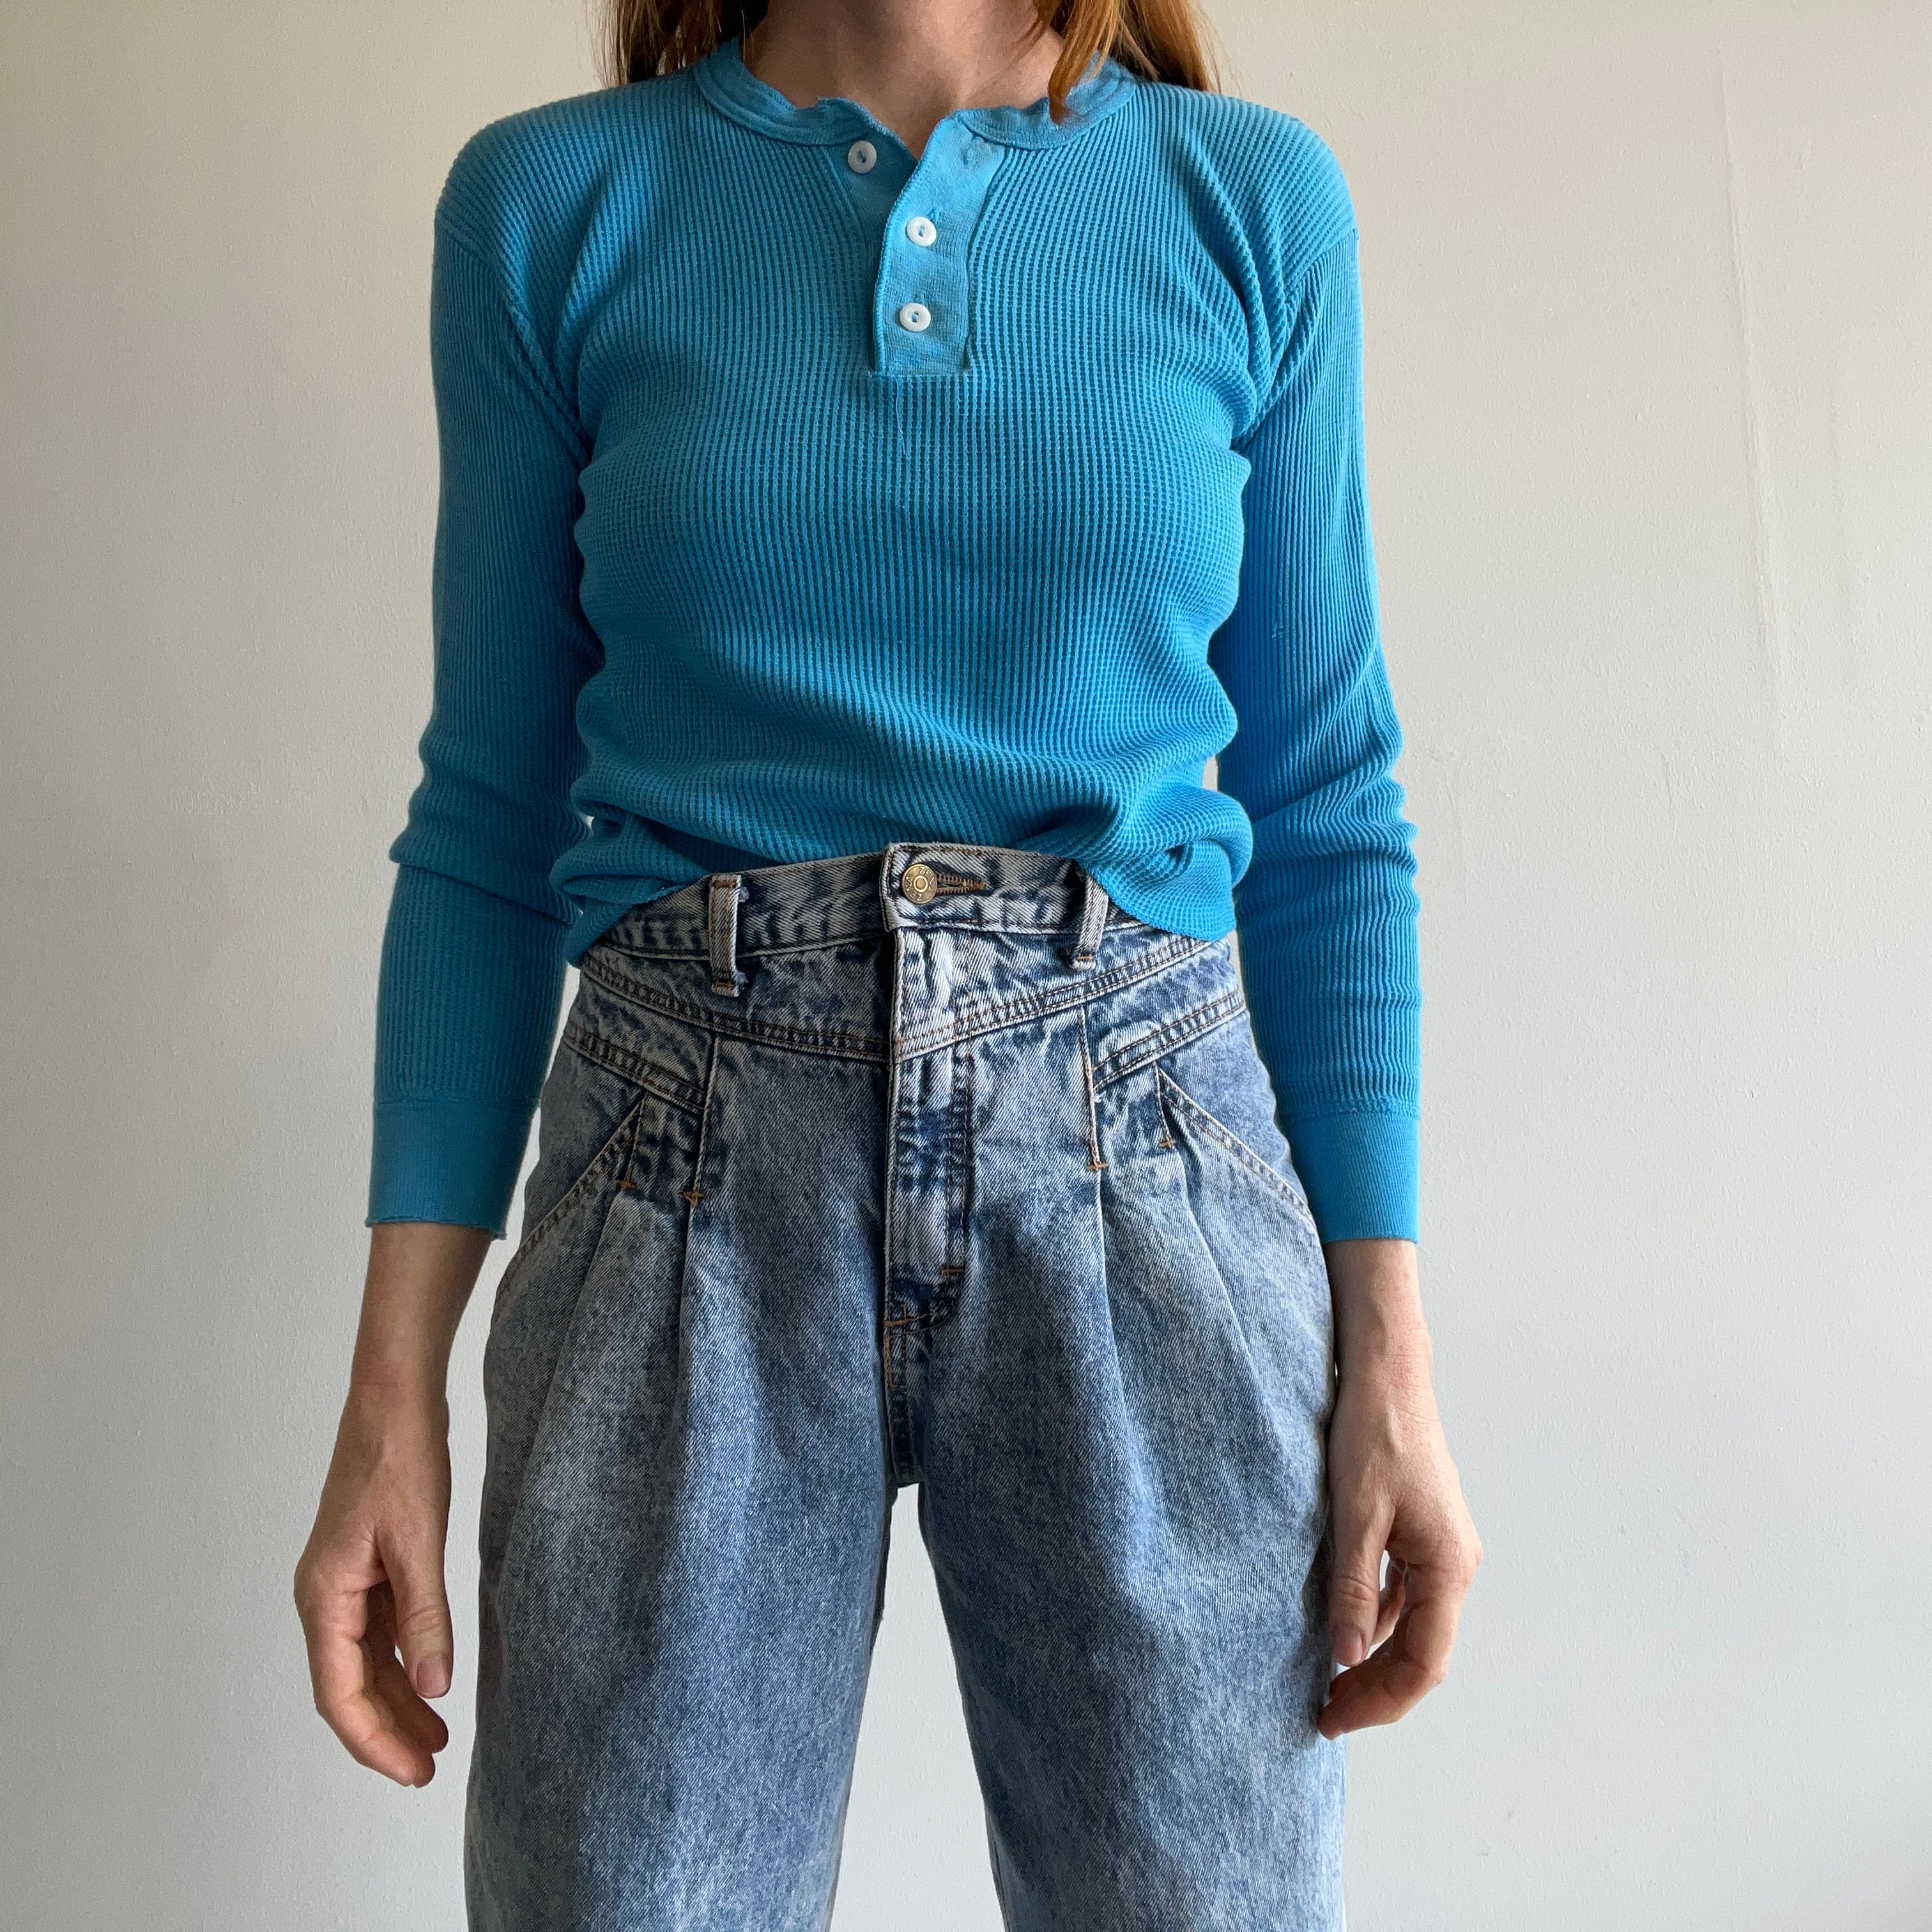 1980s Teal Thermal Waffle Knit Henley with Worn Elbows